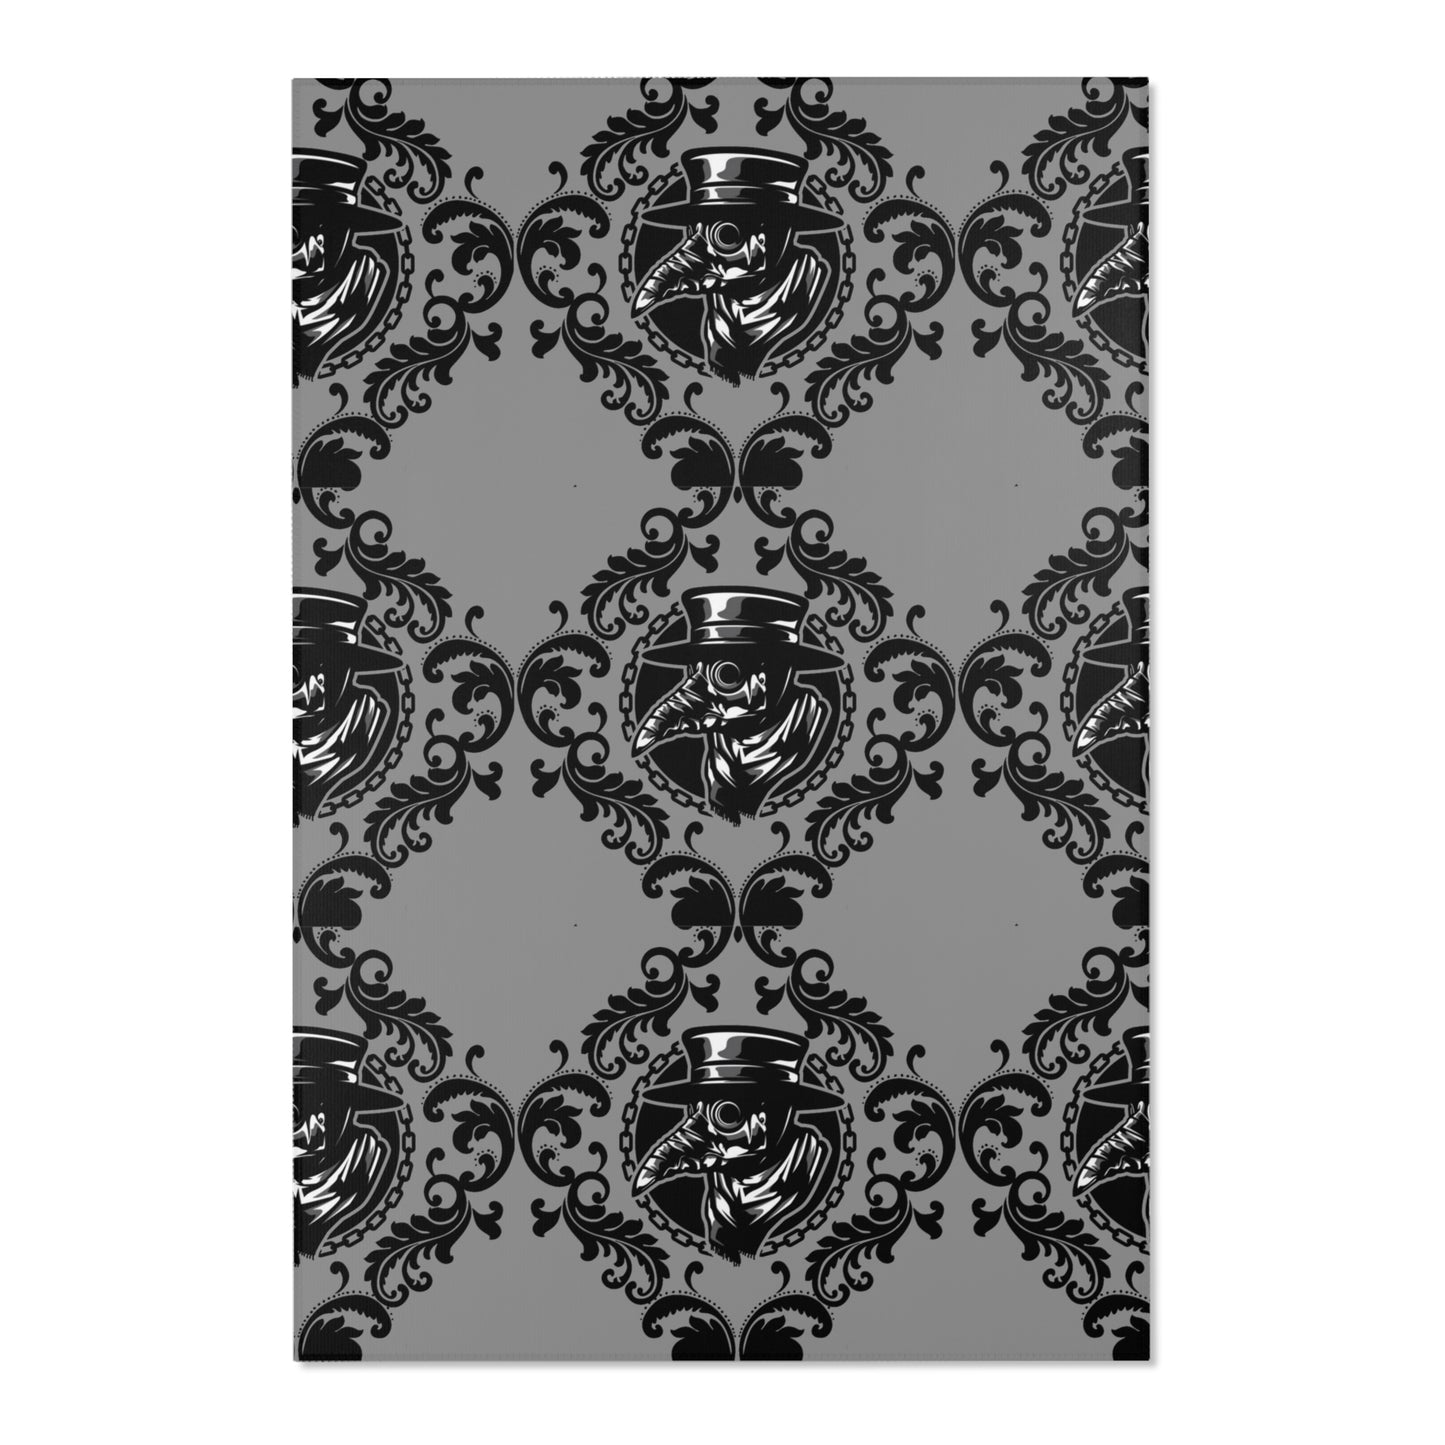 Plague Doctor Gothic Inspired Area Rug Lord and Lady Towers